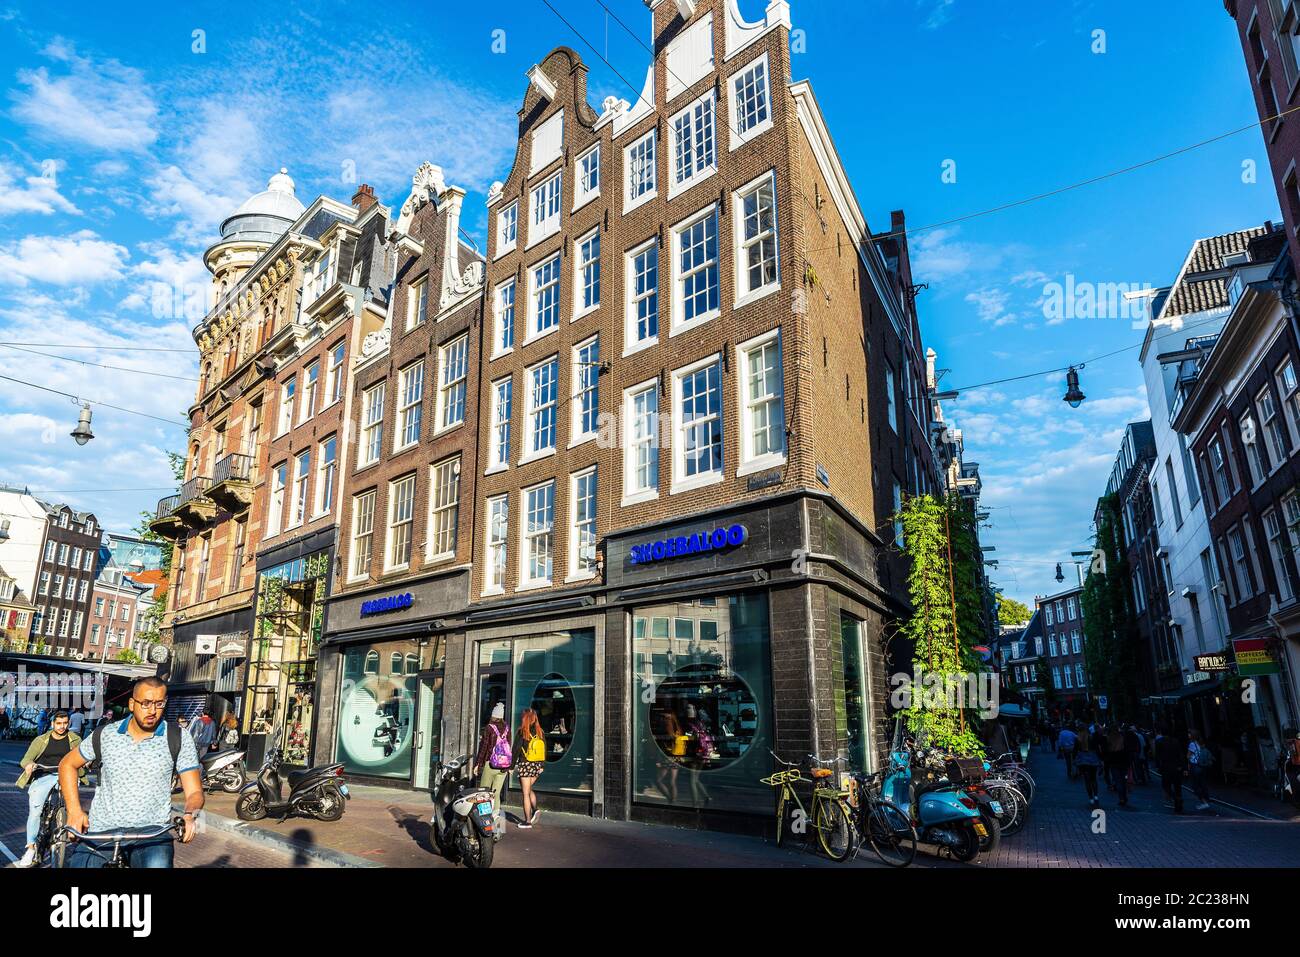 Amsterdam, Netherlands - September 9, 2018: Shopping street with people around and Shoebaloo shop in the old town of Amsterdam, Netherlands Stock Photo